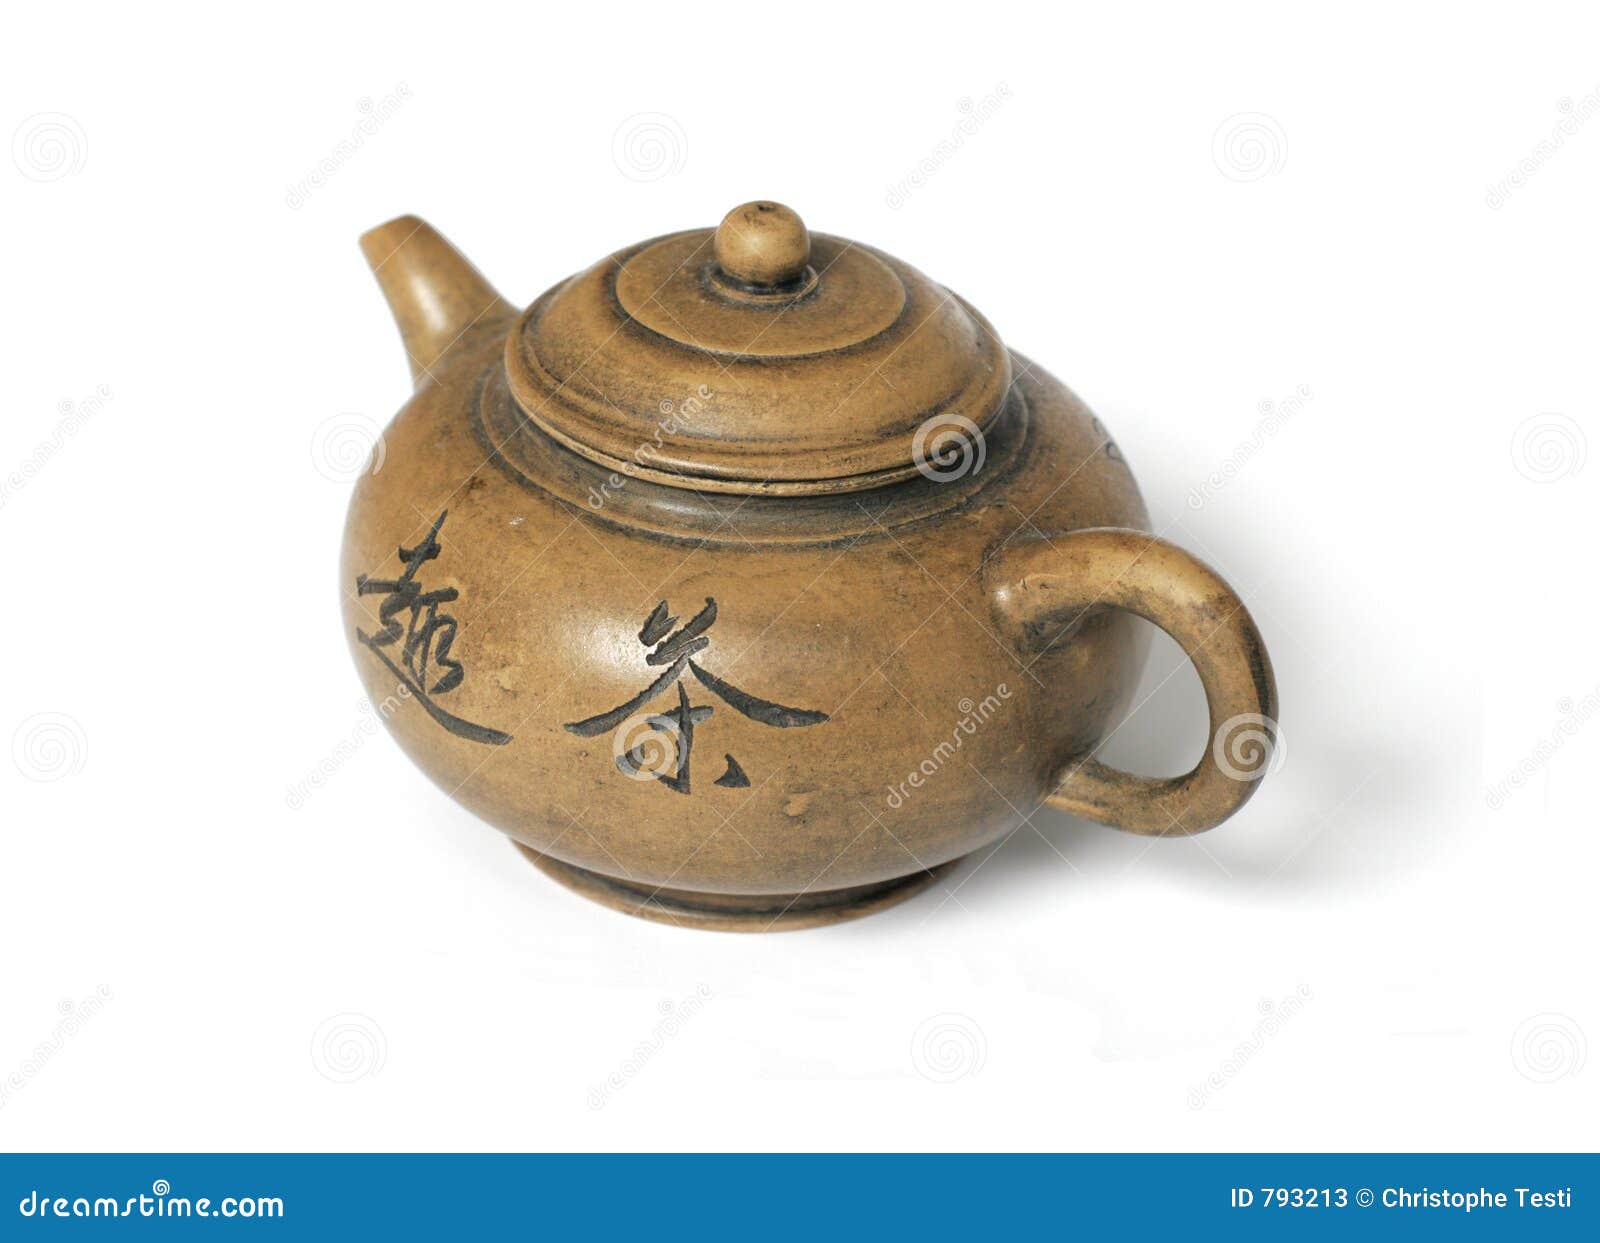 CHINA HANGZHOU Young tea server pours tea from behind his back using  antique long spout teapot Stock Photo - Alamy